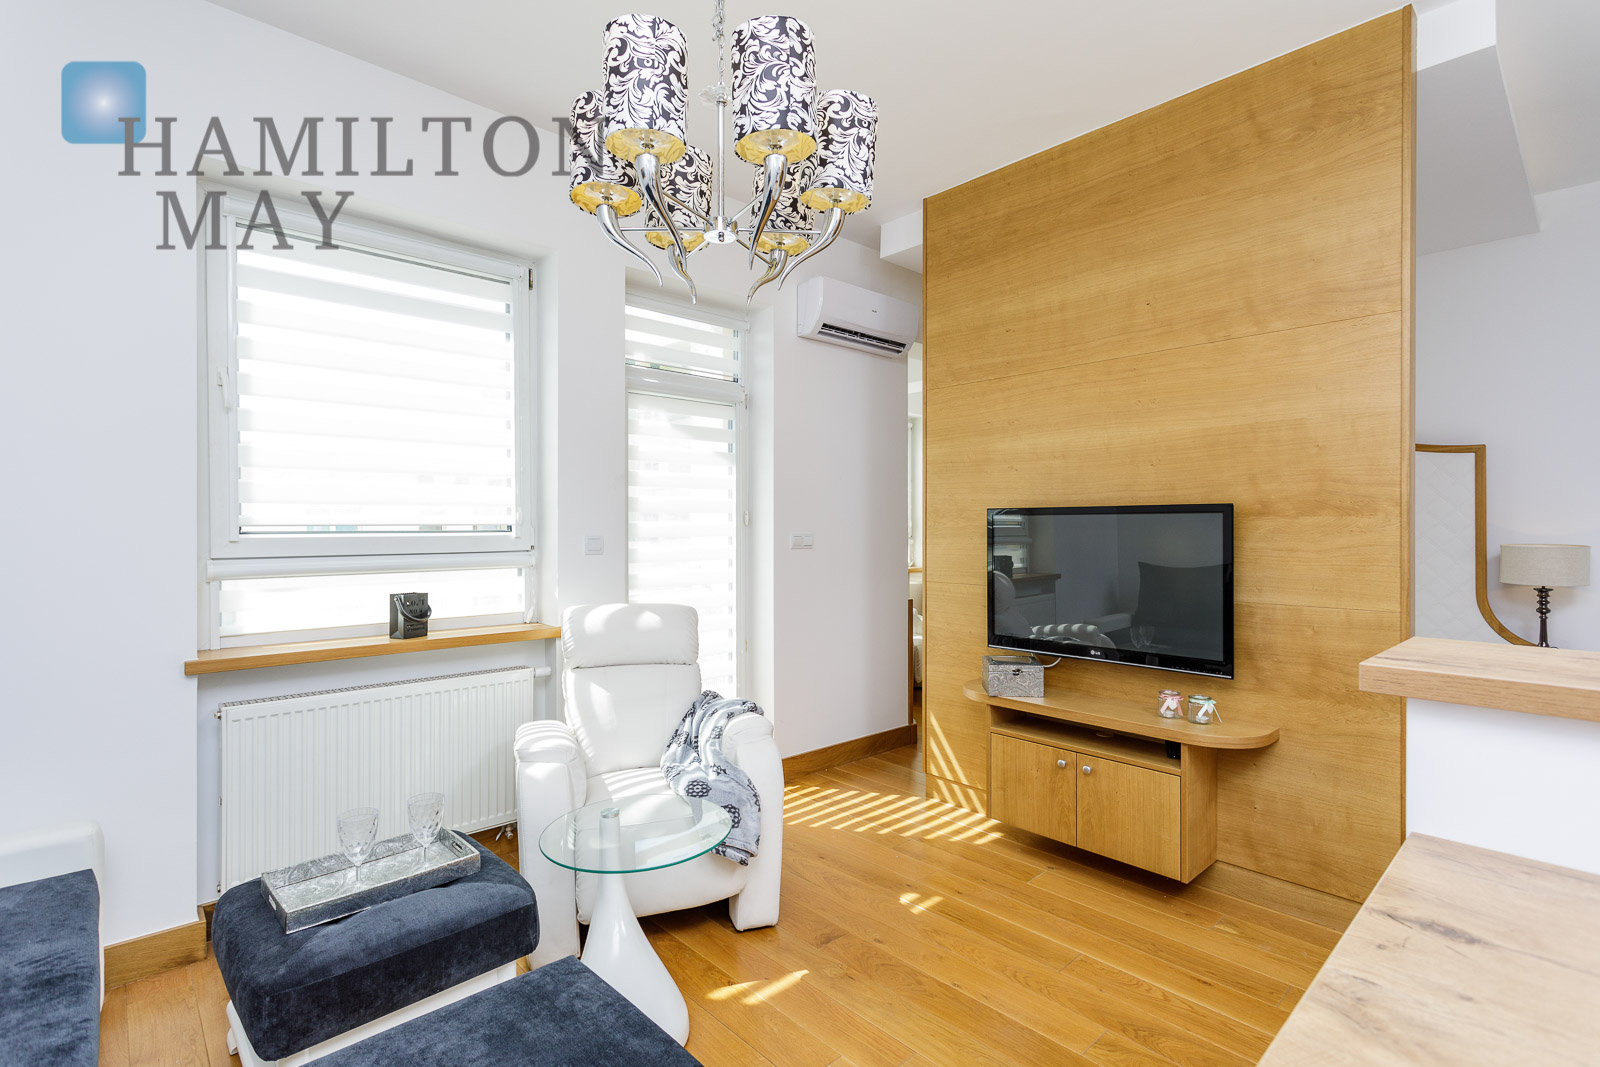 A suite of 2 fully equipped apartments - a perfect investment opportunity - Mokotów Warsaw for sale